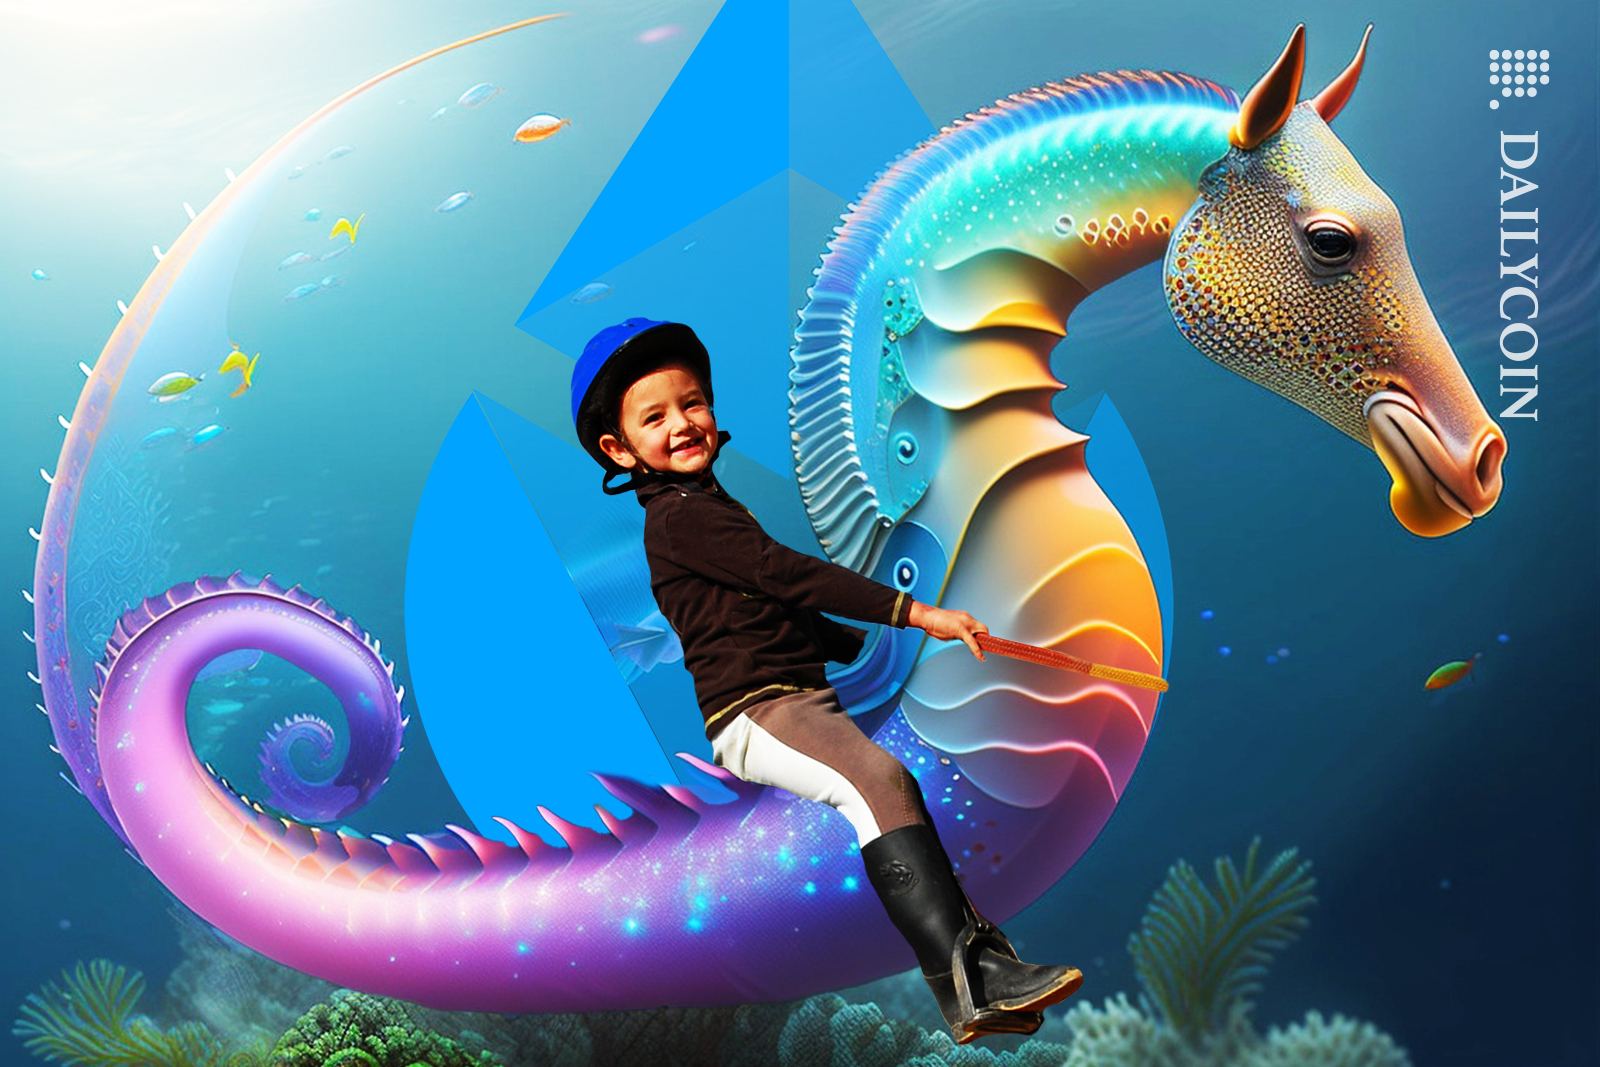 Little girl riding a seahorse in the ocean in front of stEth logo.